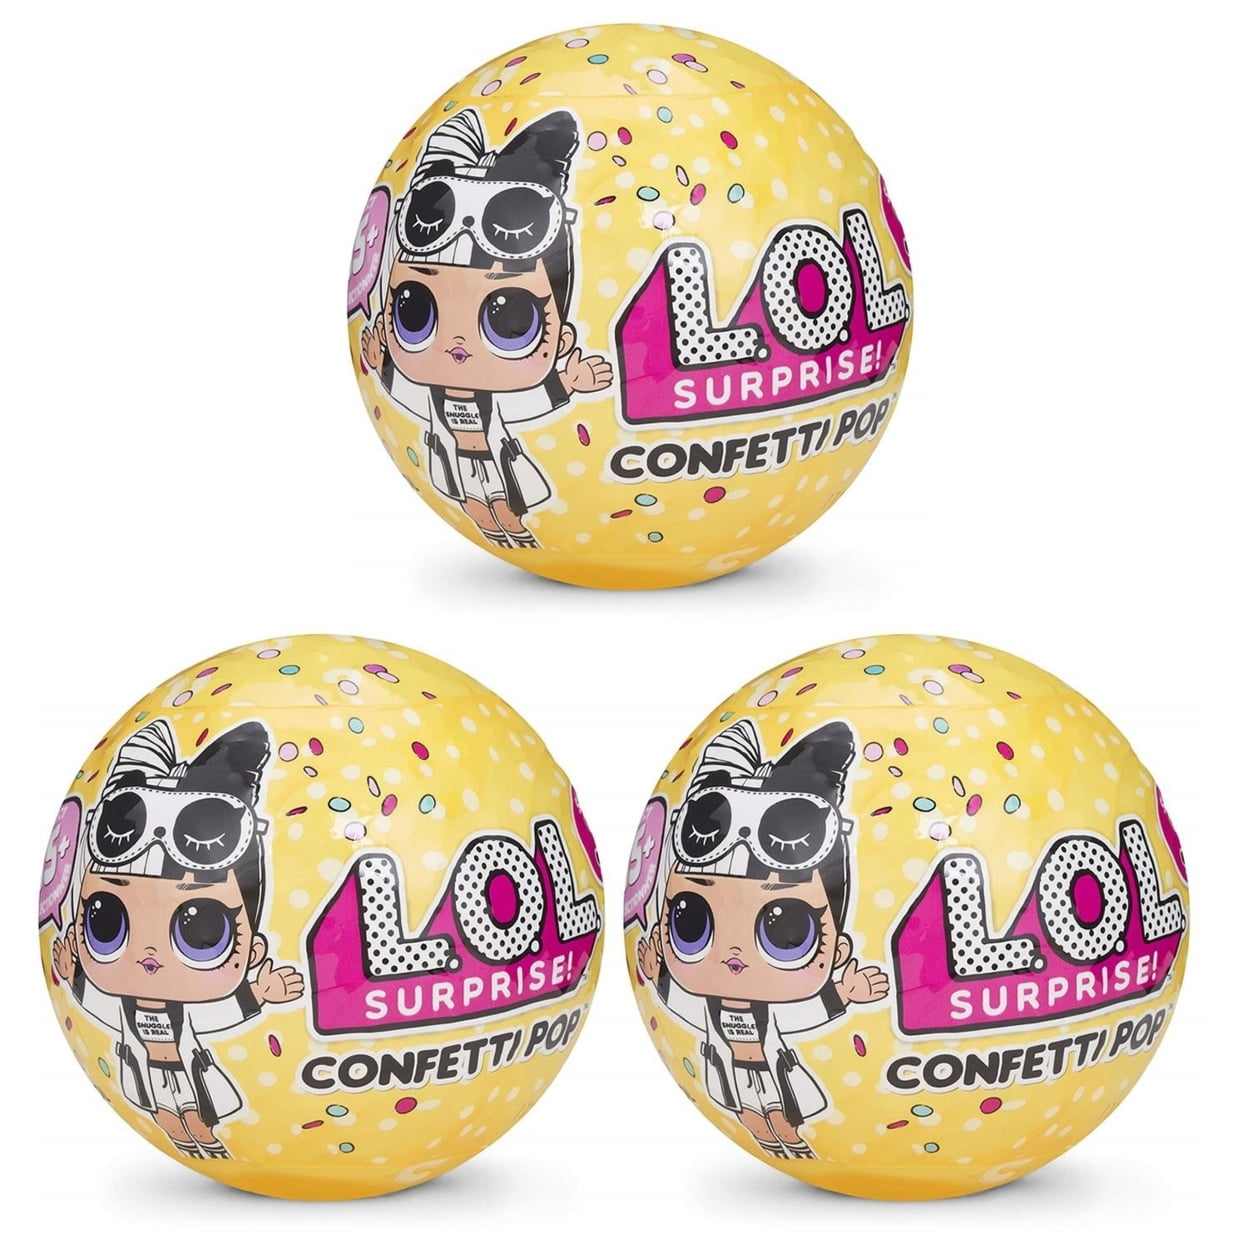 Schaduw Valkuilen Infrarood L.O.L. Surprise! Series 3 Confetti Pop 3-Pack Wave 2 Snuggle Babe LOL Doll  MGA 5515393PACK - Walmart.com